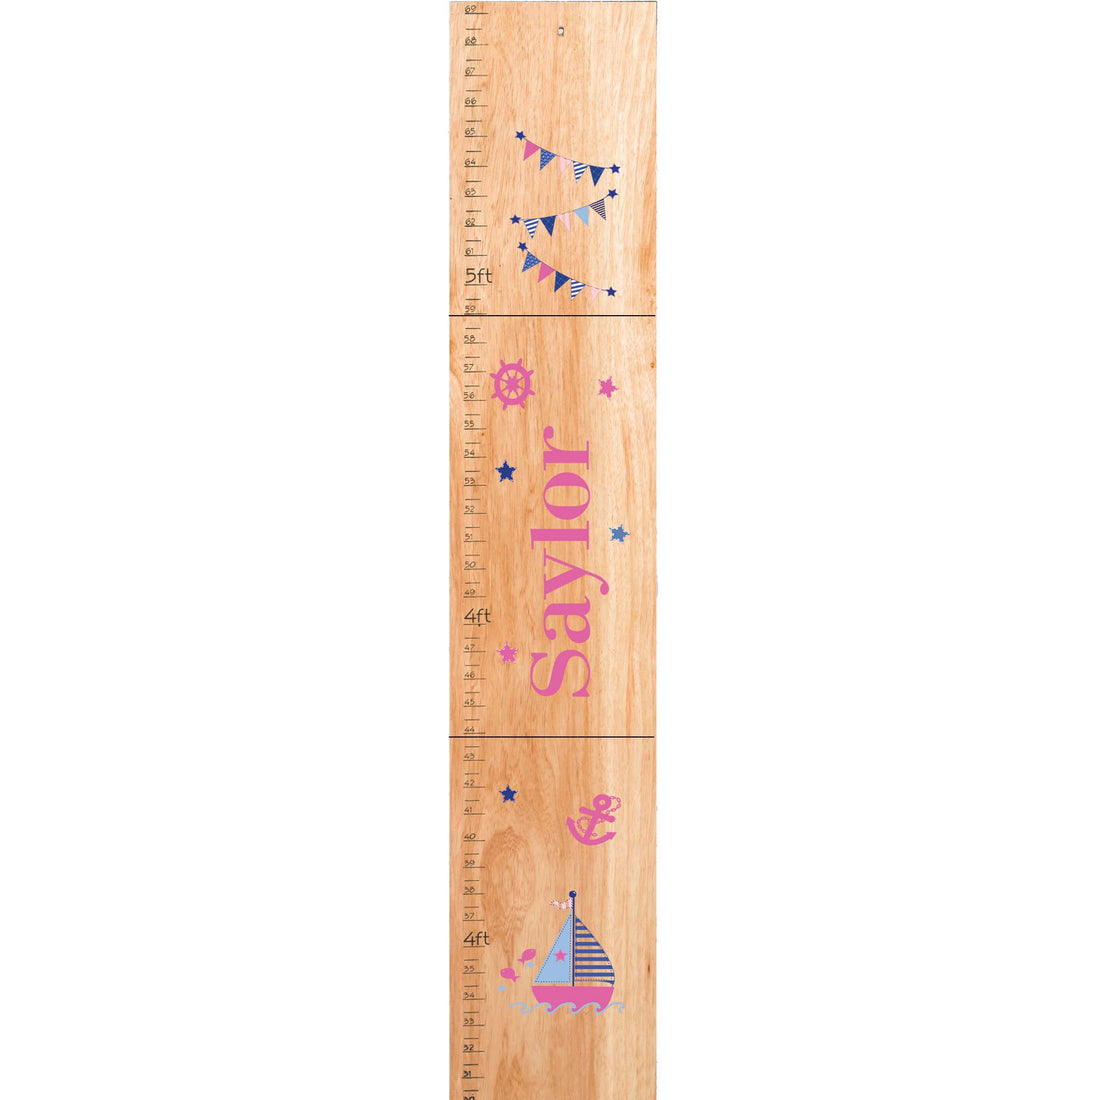 Personalized Natural Growth Chart With Sailboat Girls Design